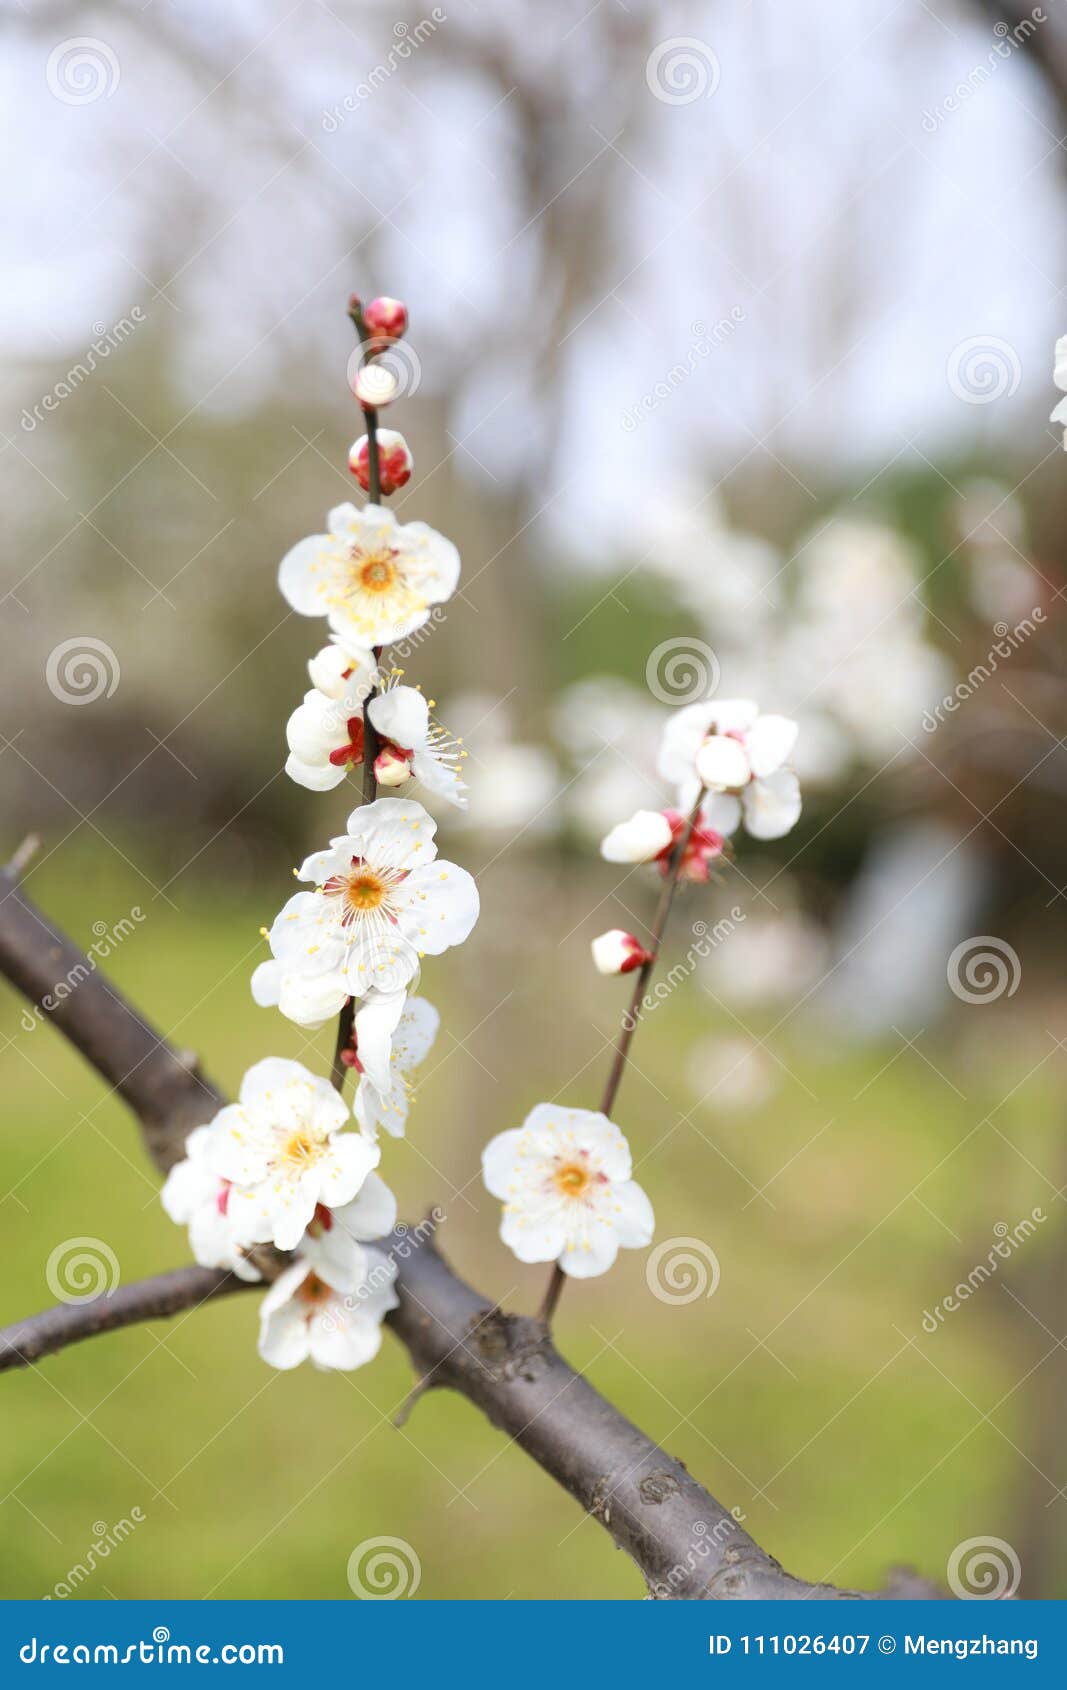 Plum Branch With Flowers Background Isolated Shanghai China